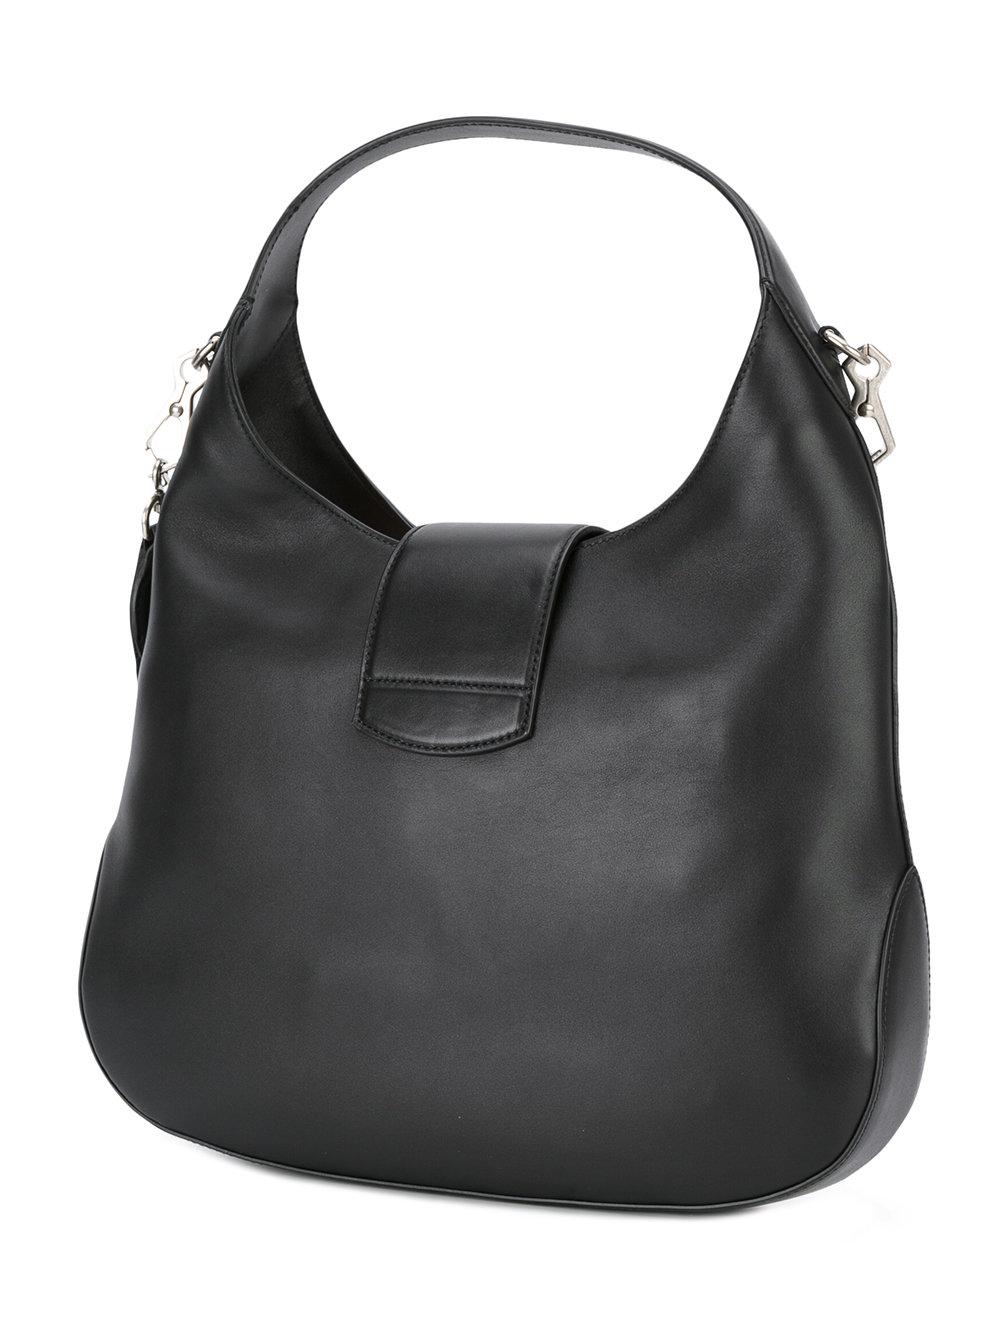 Gucci Leather Dionysus Hobo Tote in Black - Lyst